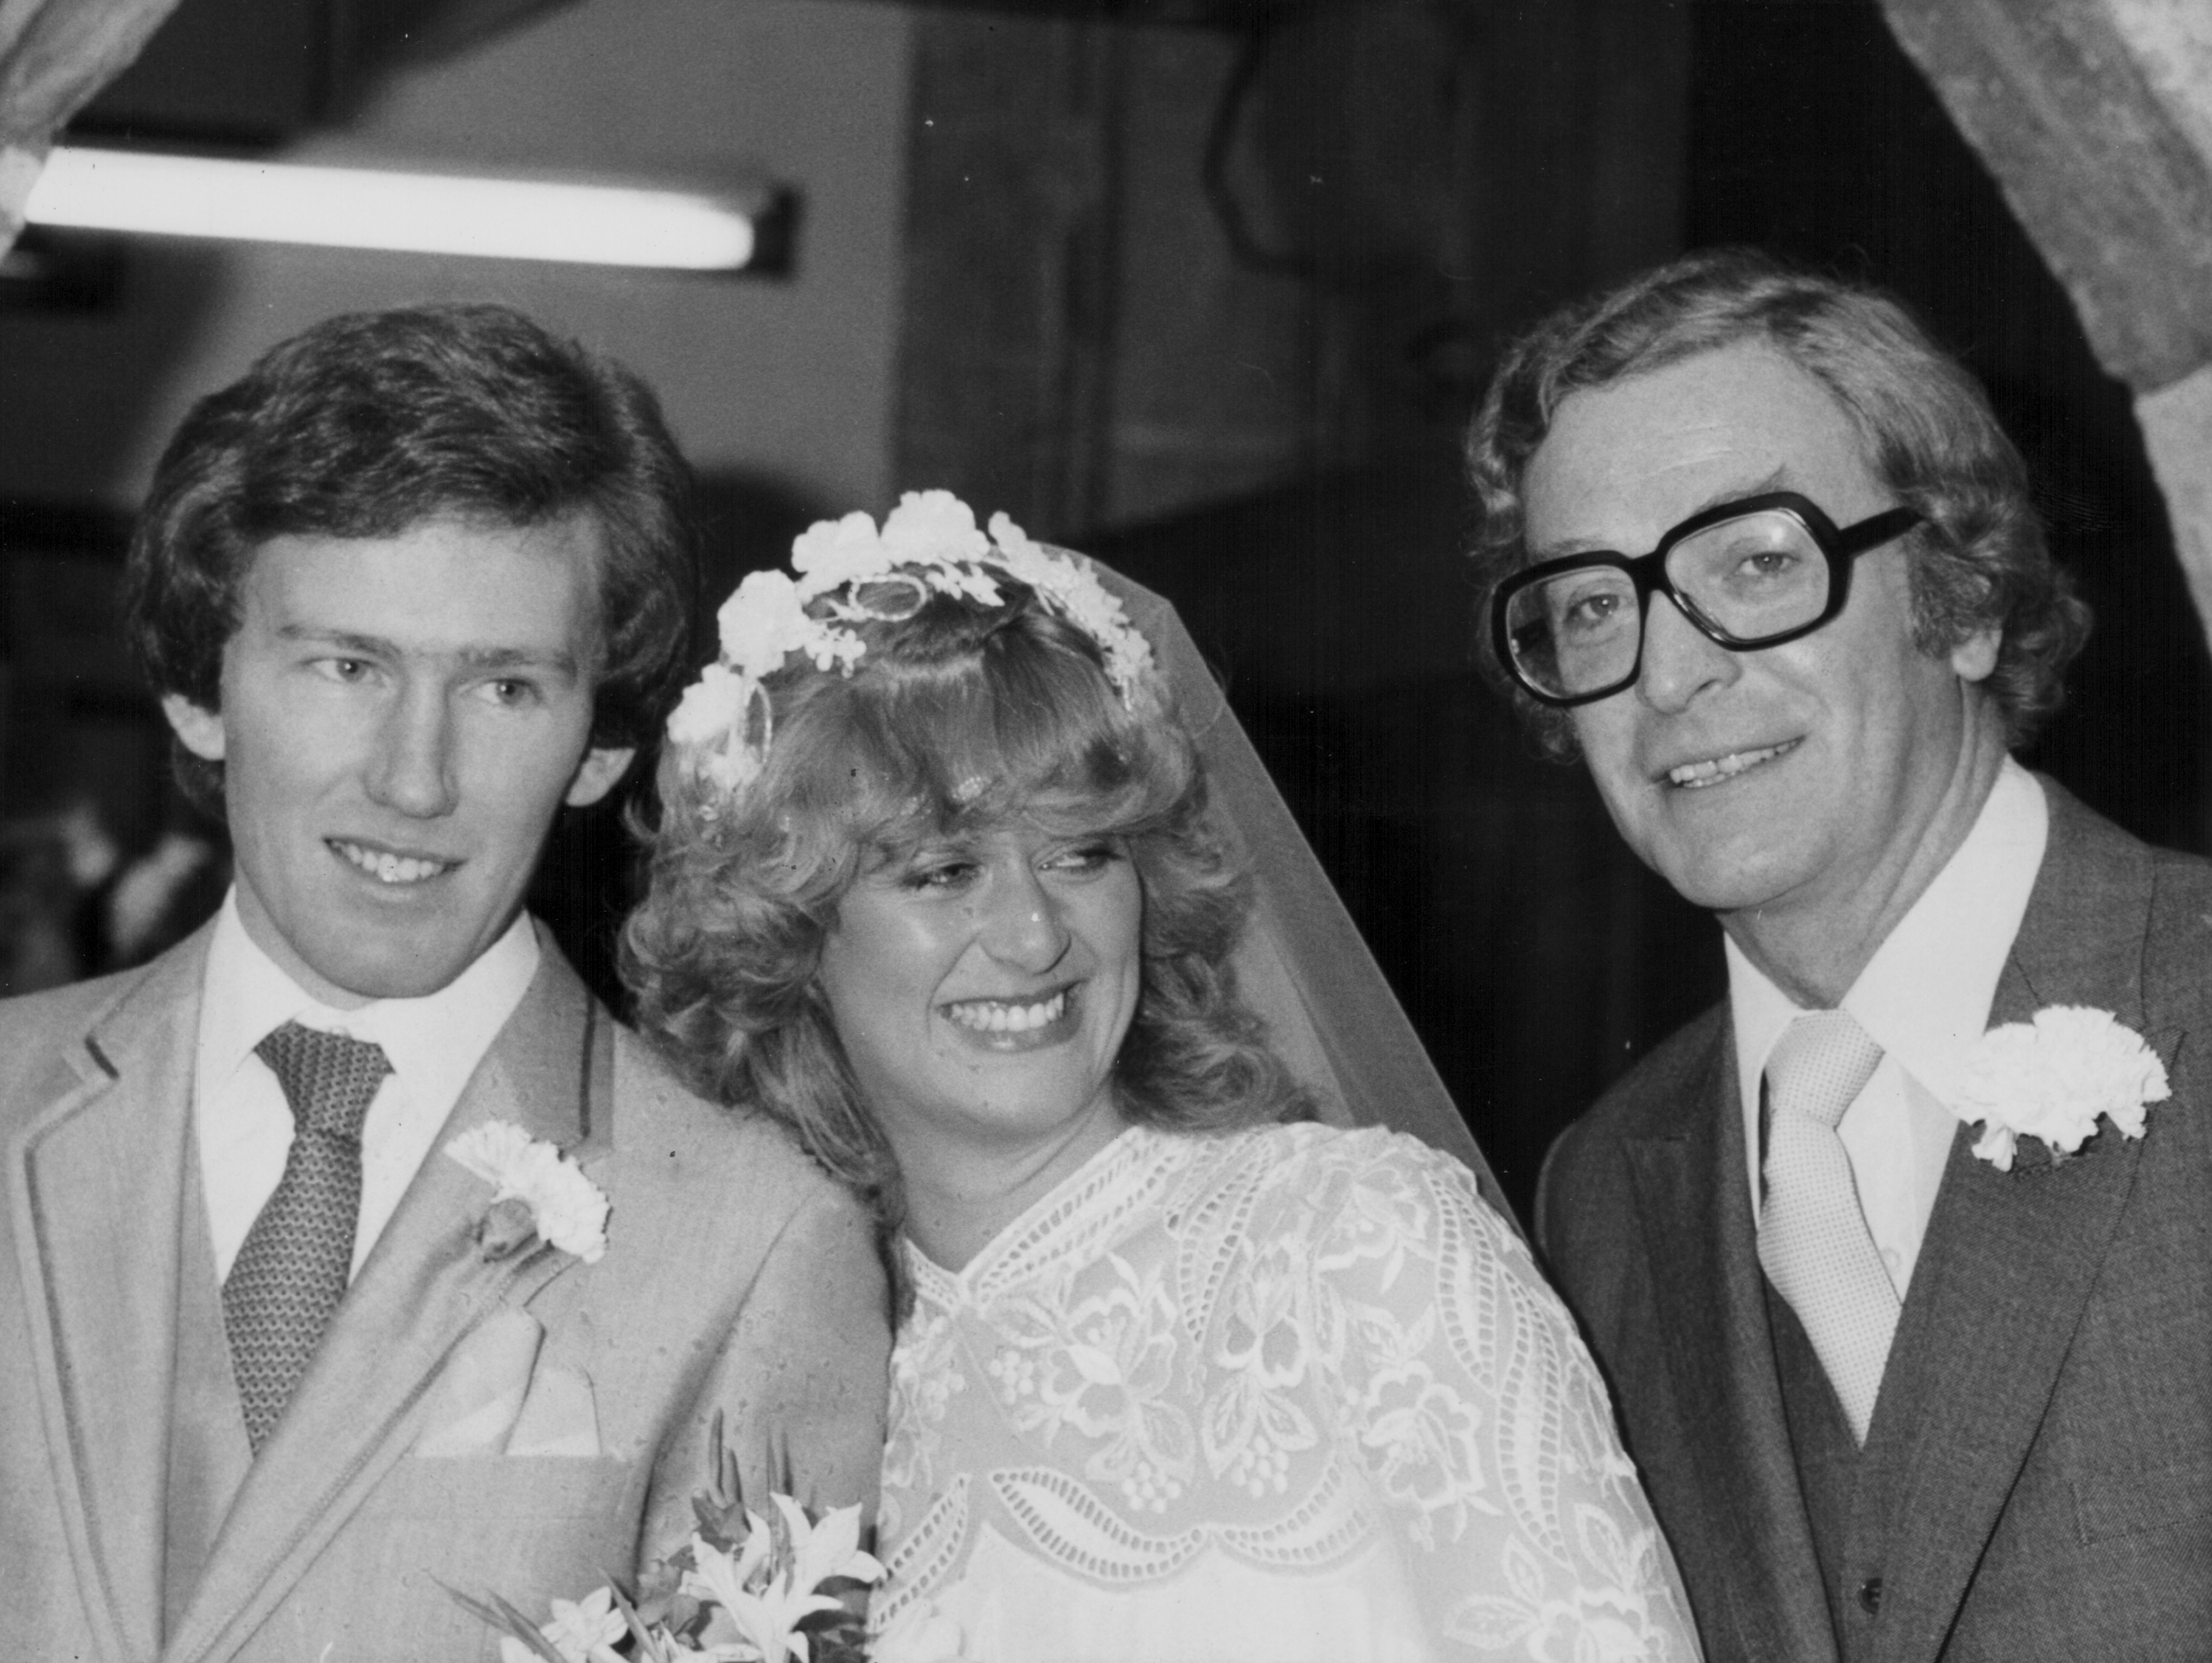 Dominique Caine (C), her husband Rowland Fernyhough (L), and her father, Michael Caine (R) during her wedding on November 7, 1981, in Warfield, Buckinghamshire. | Source: Getty Images